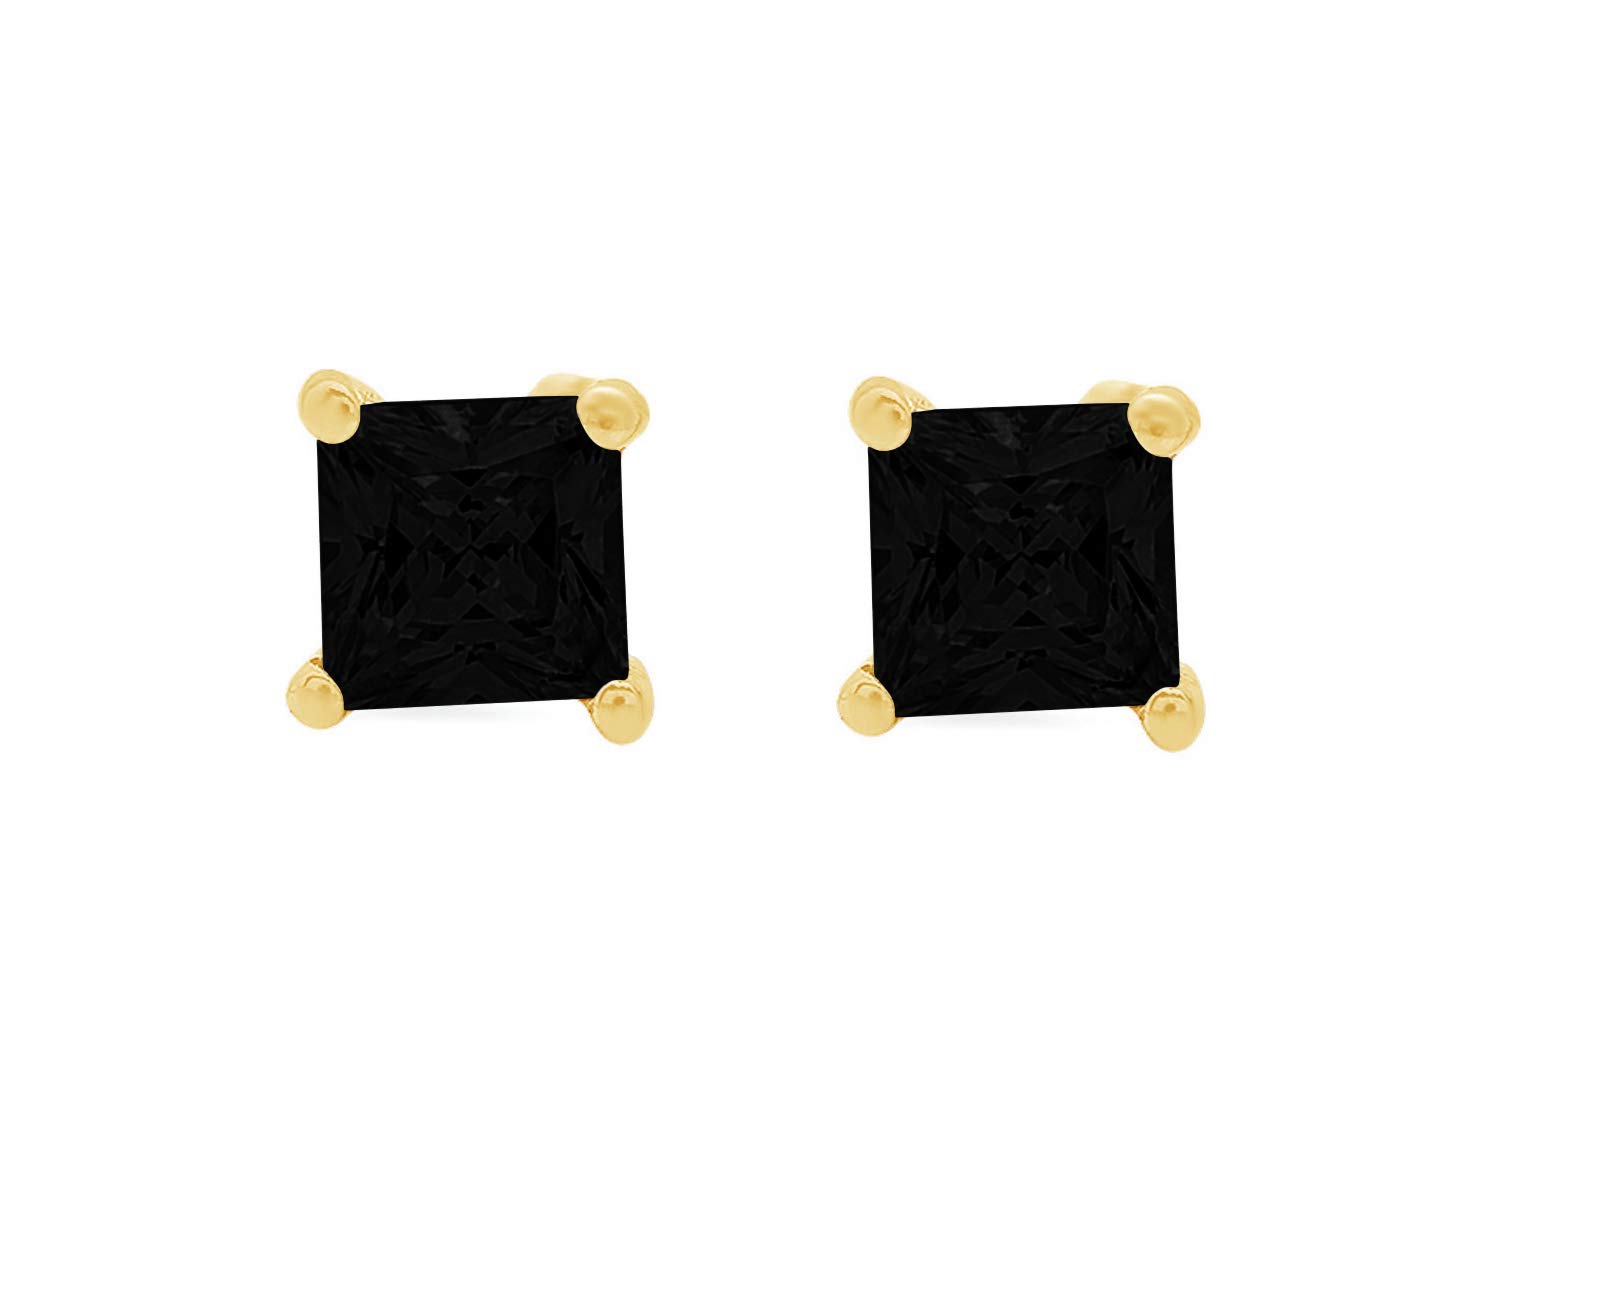 0.4ct Brilliant Princess Cut Solitaire Flawless Genuine Natural Black Onyx Gemstone Unisex Pair of Stud Designer Earrings Solid 14k Yellow Gold Screw Back conflict free Jewelry